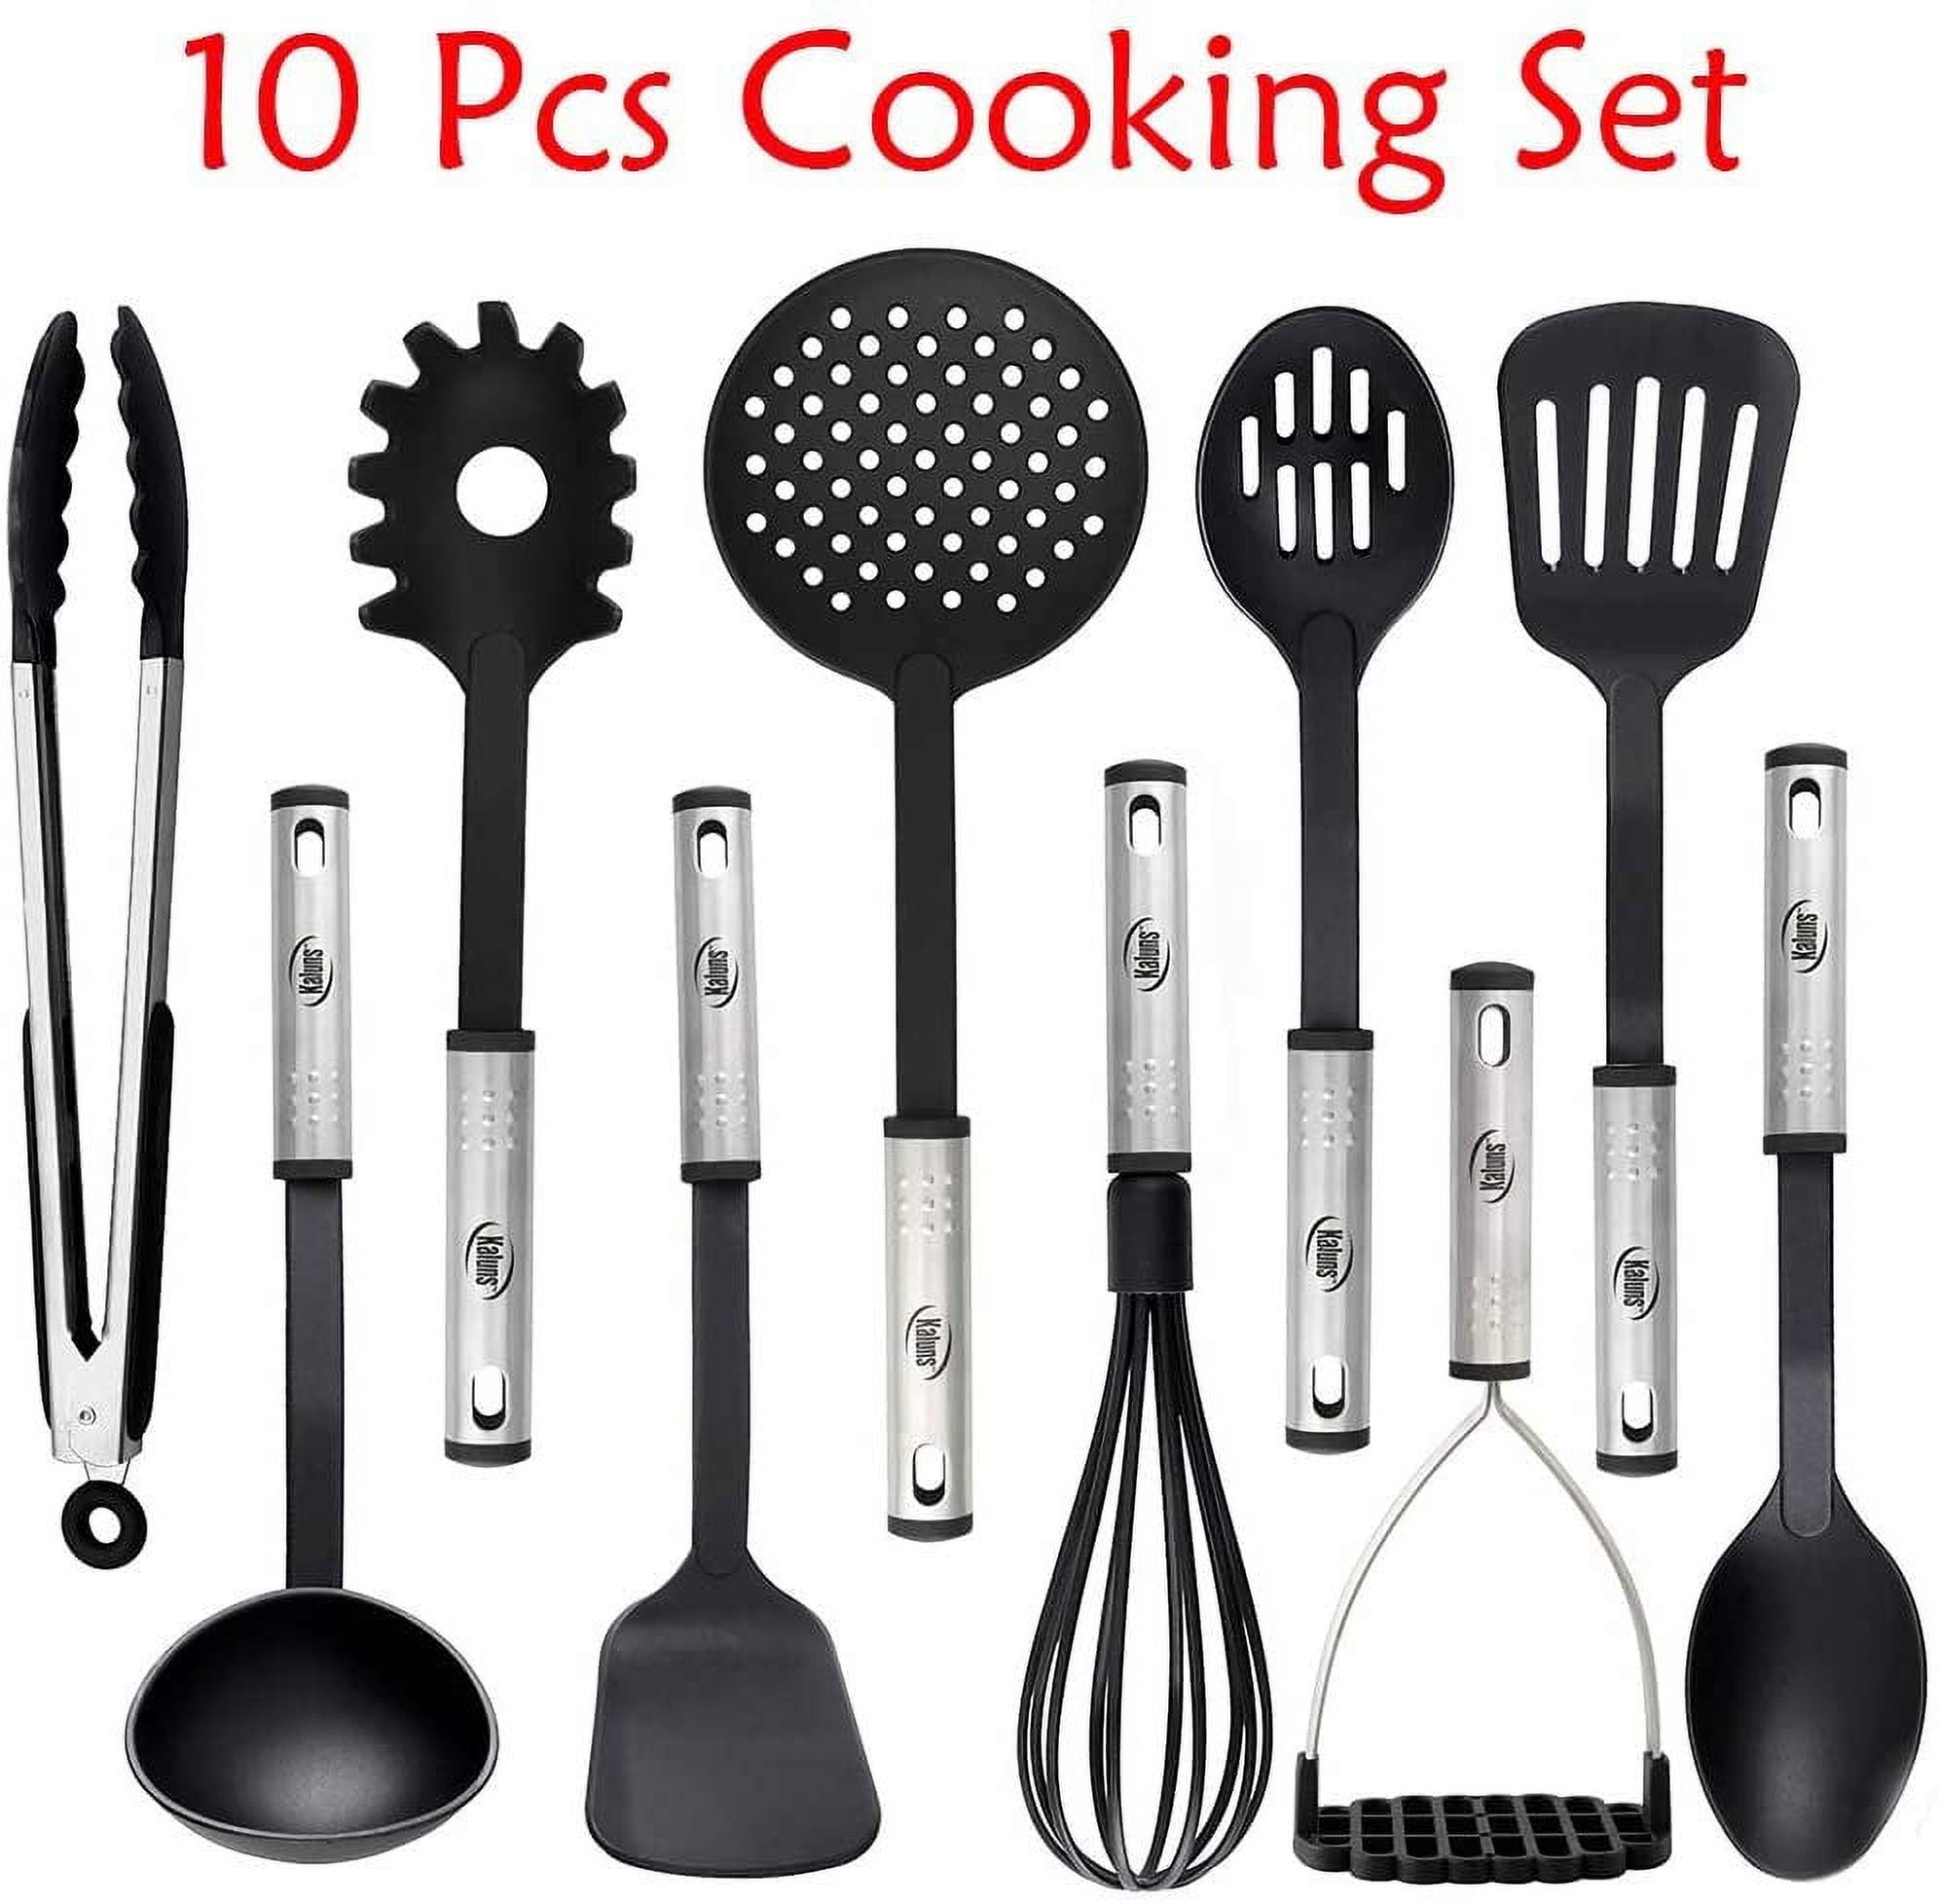 Kaluns Gray Utensils Wood And Silicone Cooking Utensil Set (Set of 21)  HD-WSU21-GR - The Home Depot